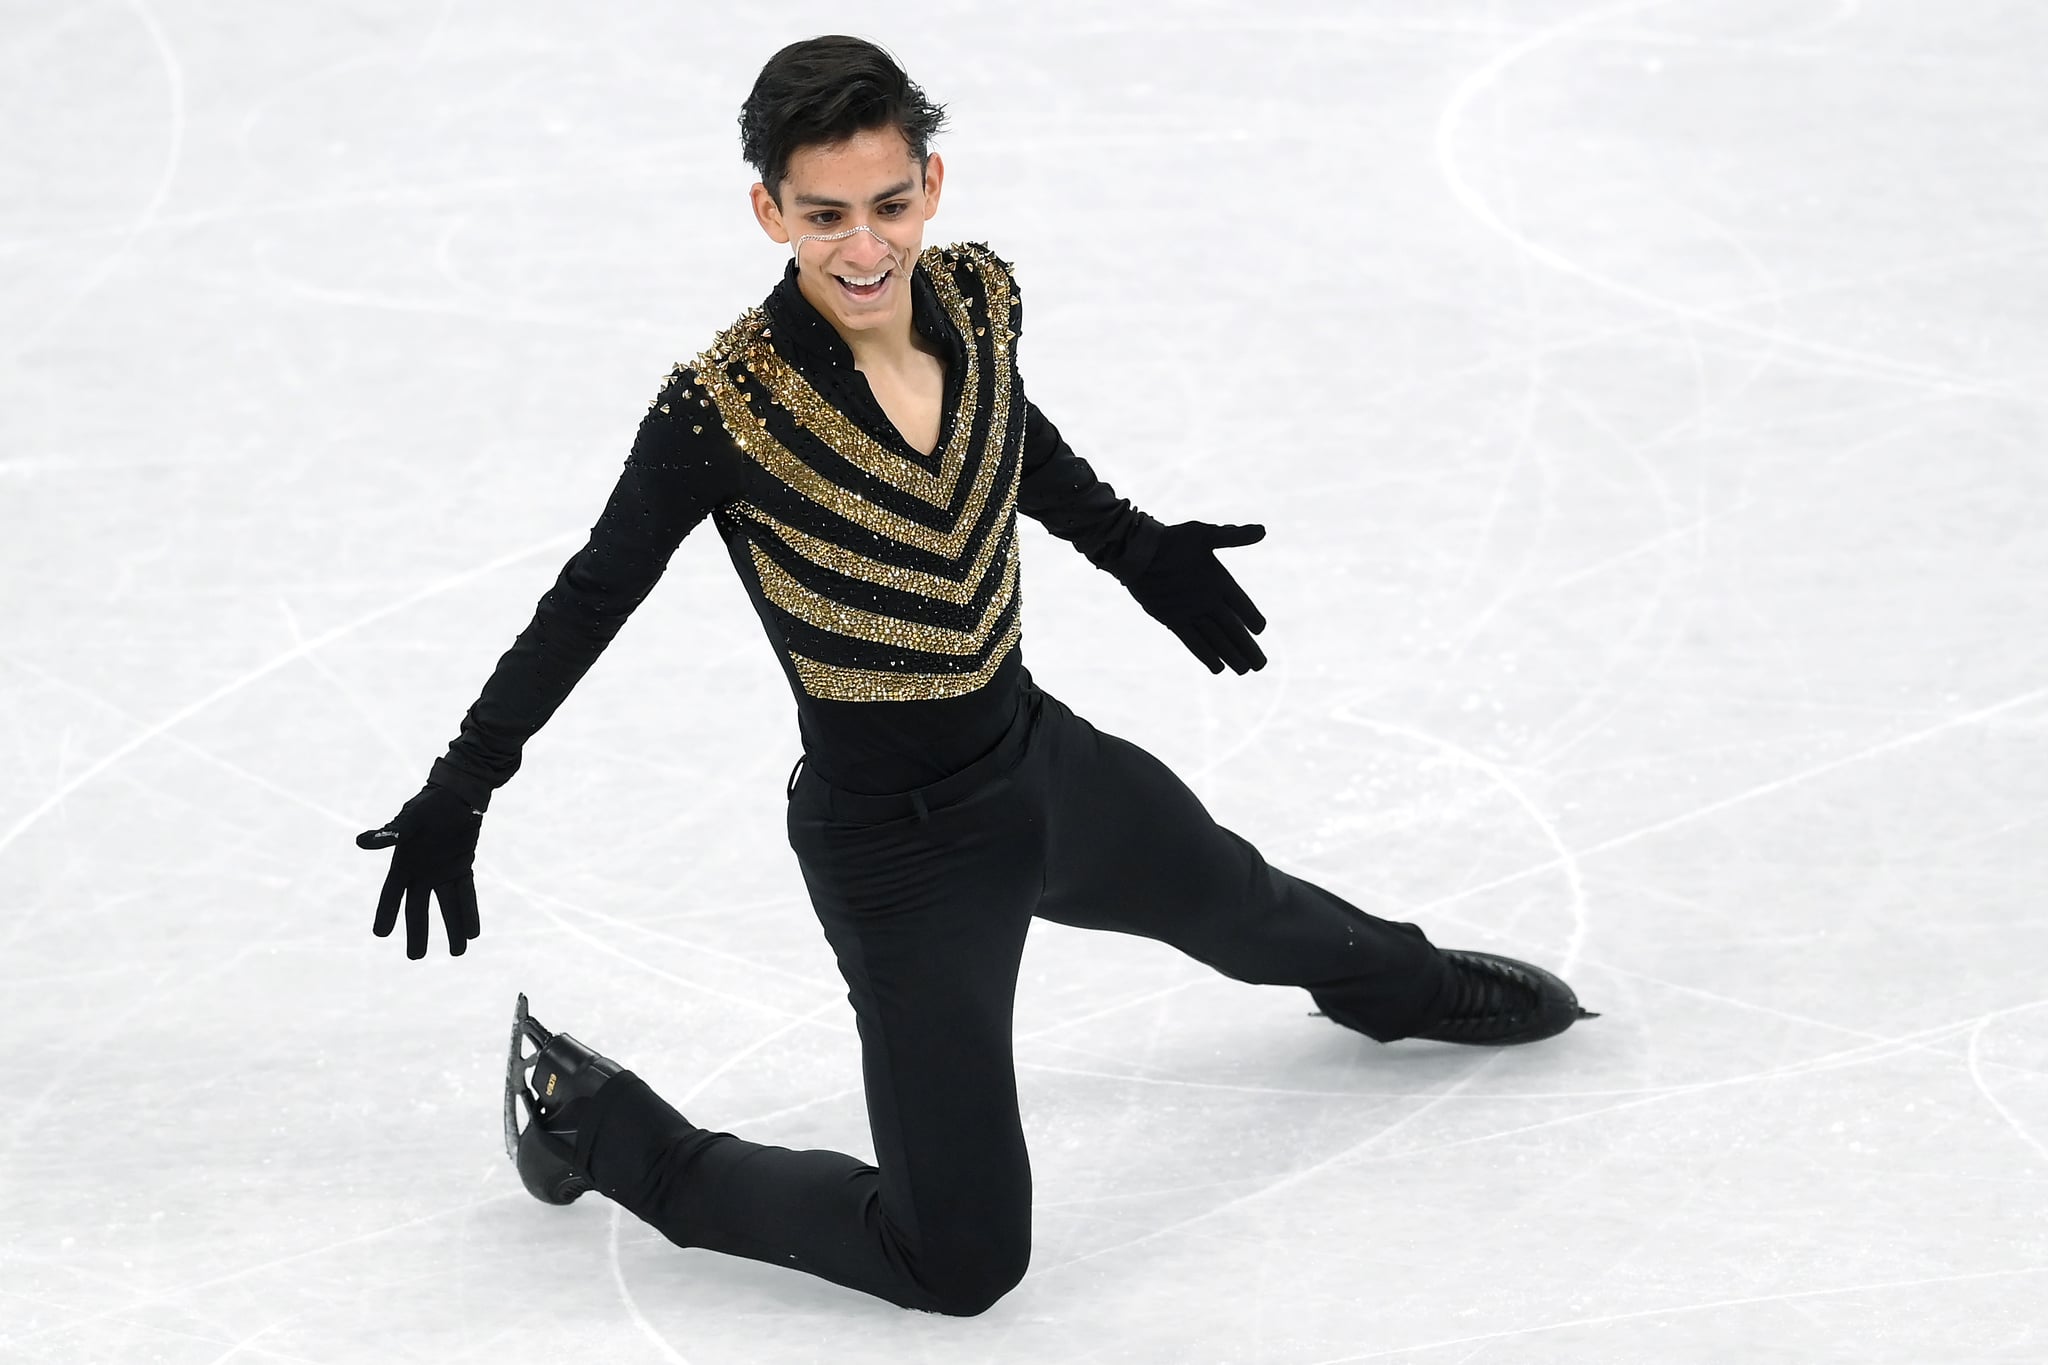 BEIJING, CHINA - FEBRUARY 08: Donovan Carrillo of Team Mexico reacts during the Men Single Skating Short Program on day four of the Beijing 2022 Winter Olympic Games at Capital Indoor Stadium on February 08, 2022 in Beijing, China. (Photo by David Ramos/Getty Images)